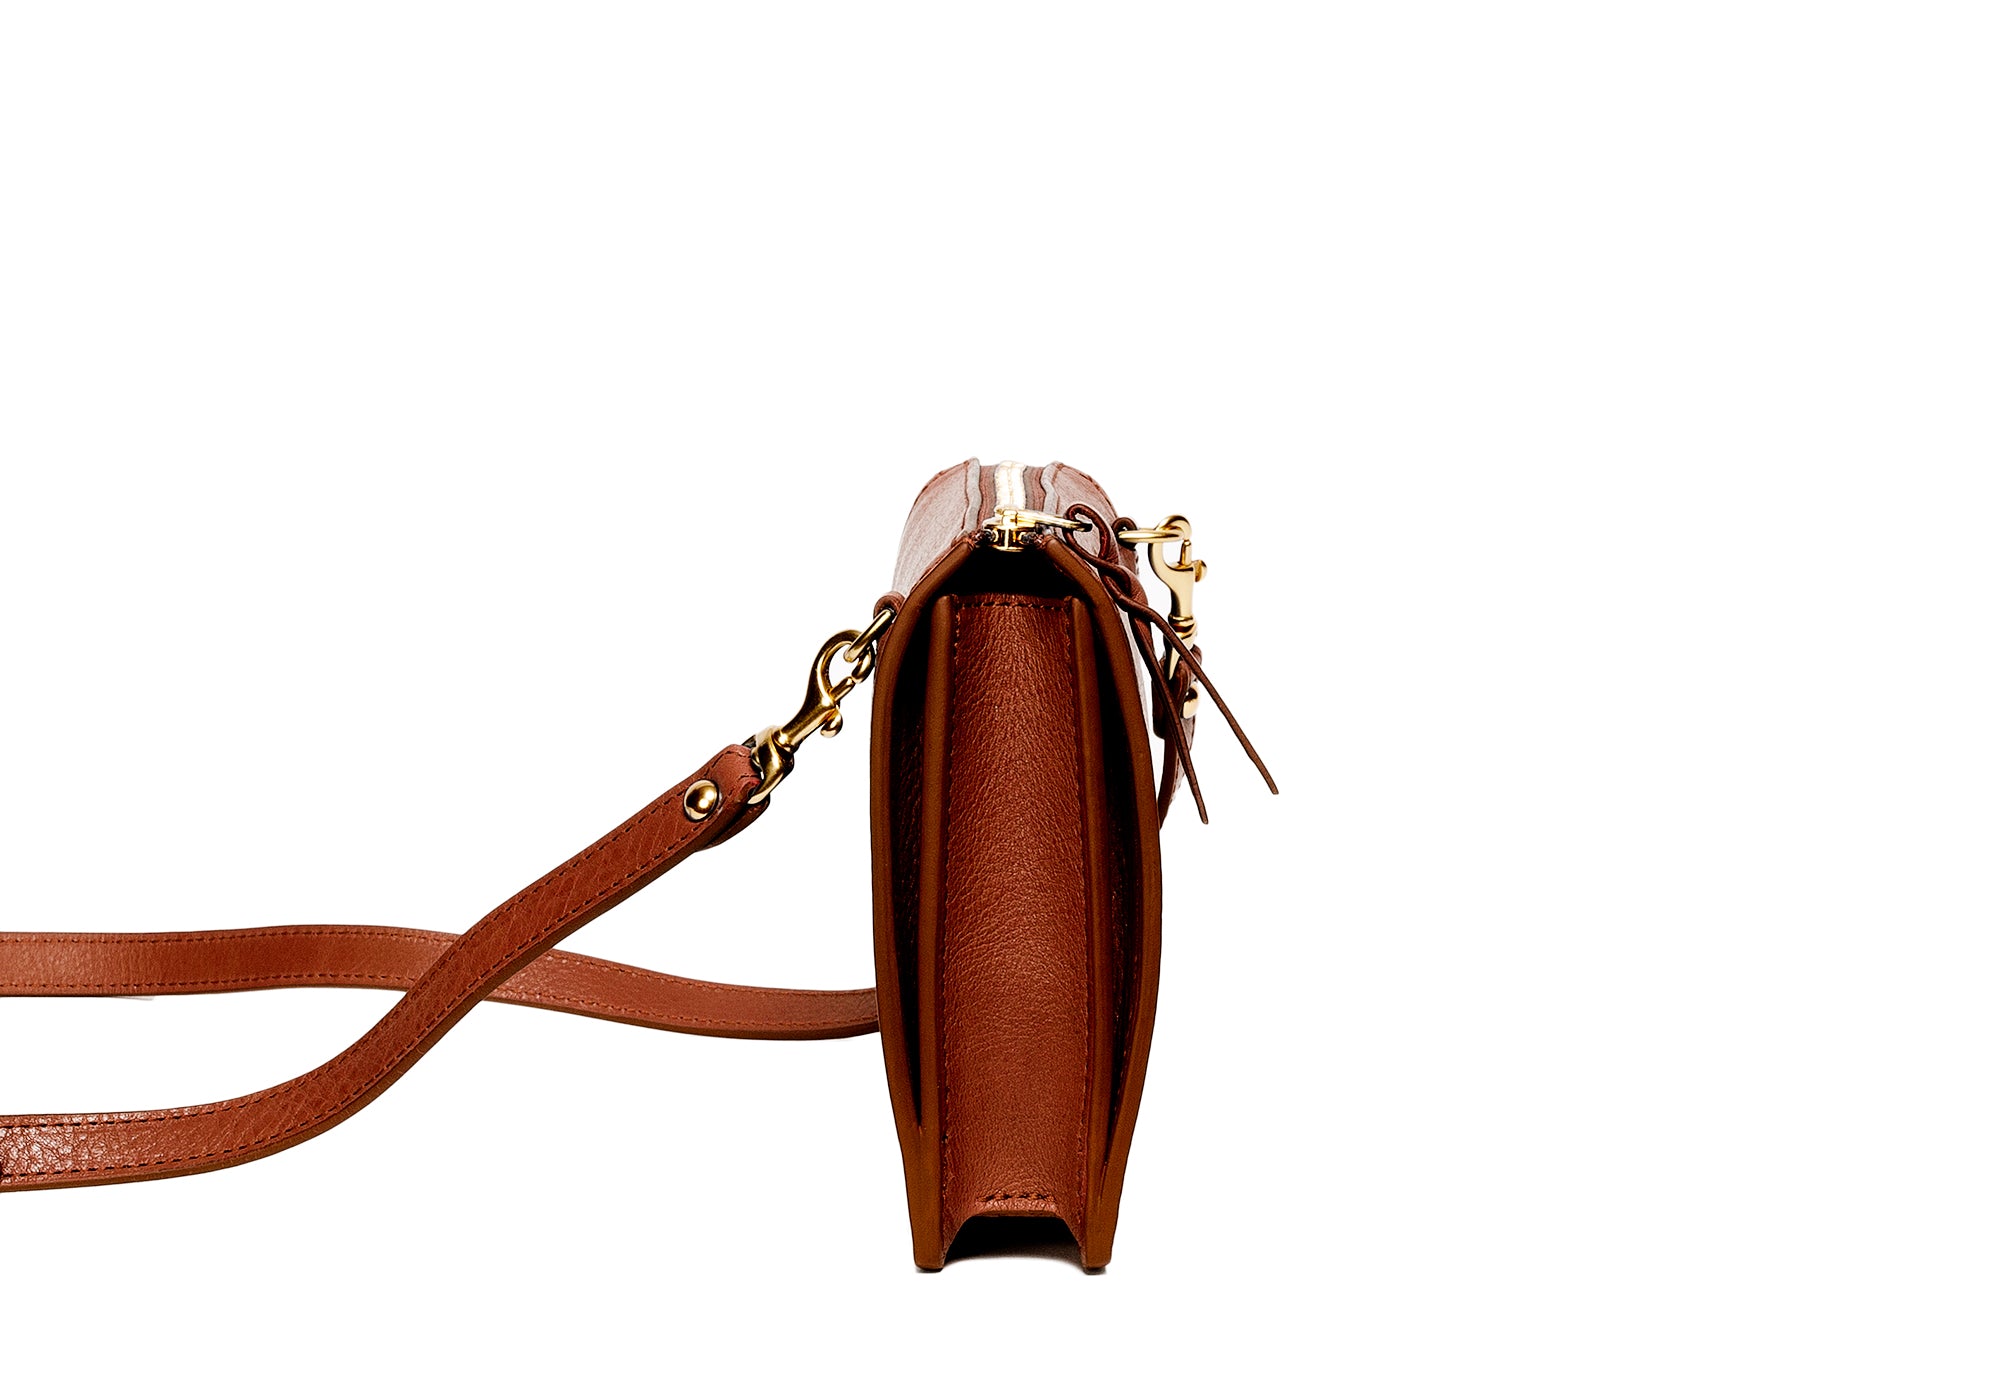 Small Leather Pouch - Giddy Up Clutch Purse - Brown